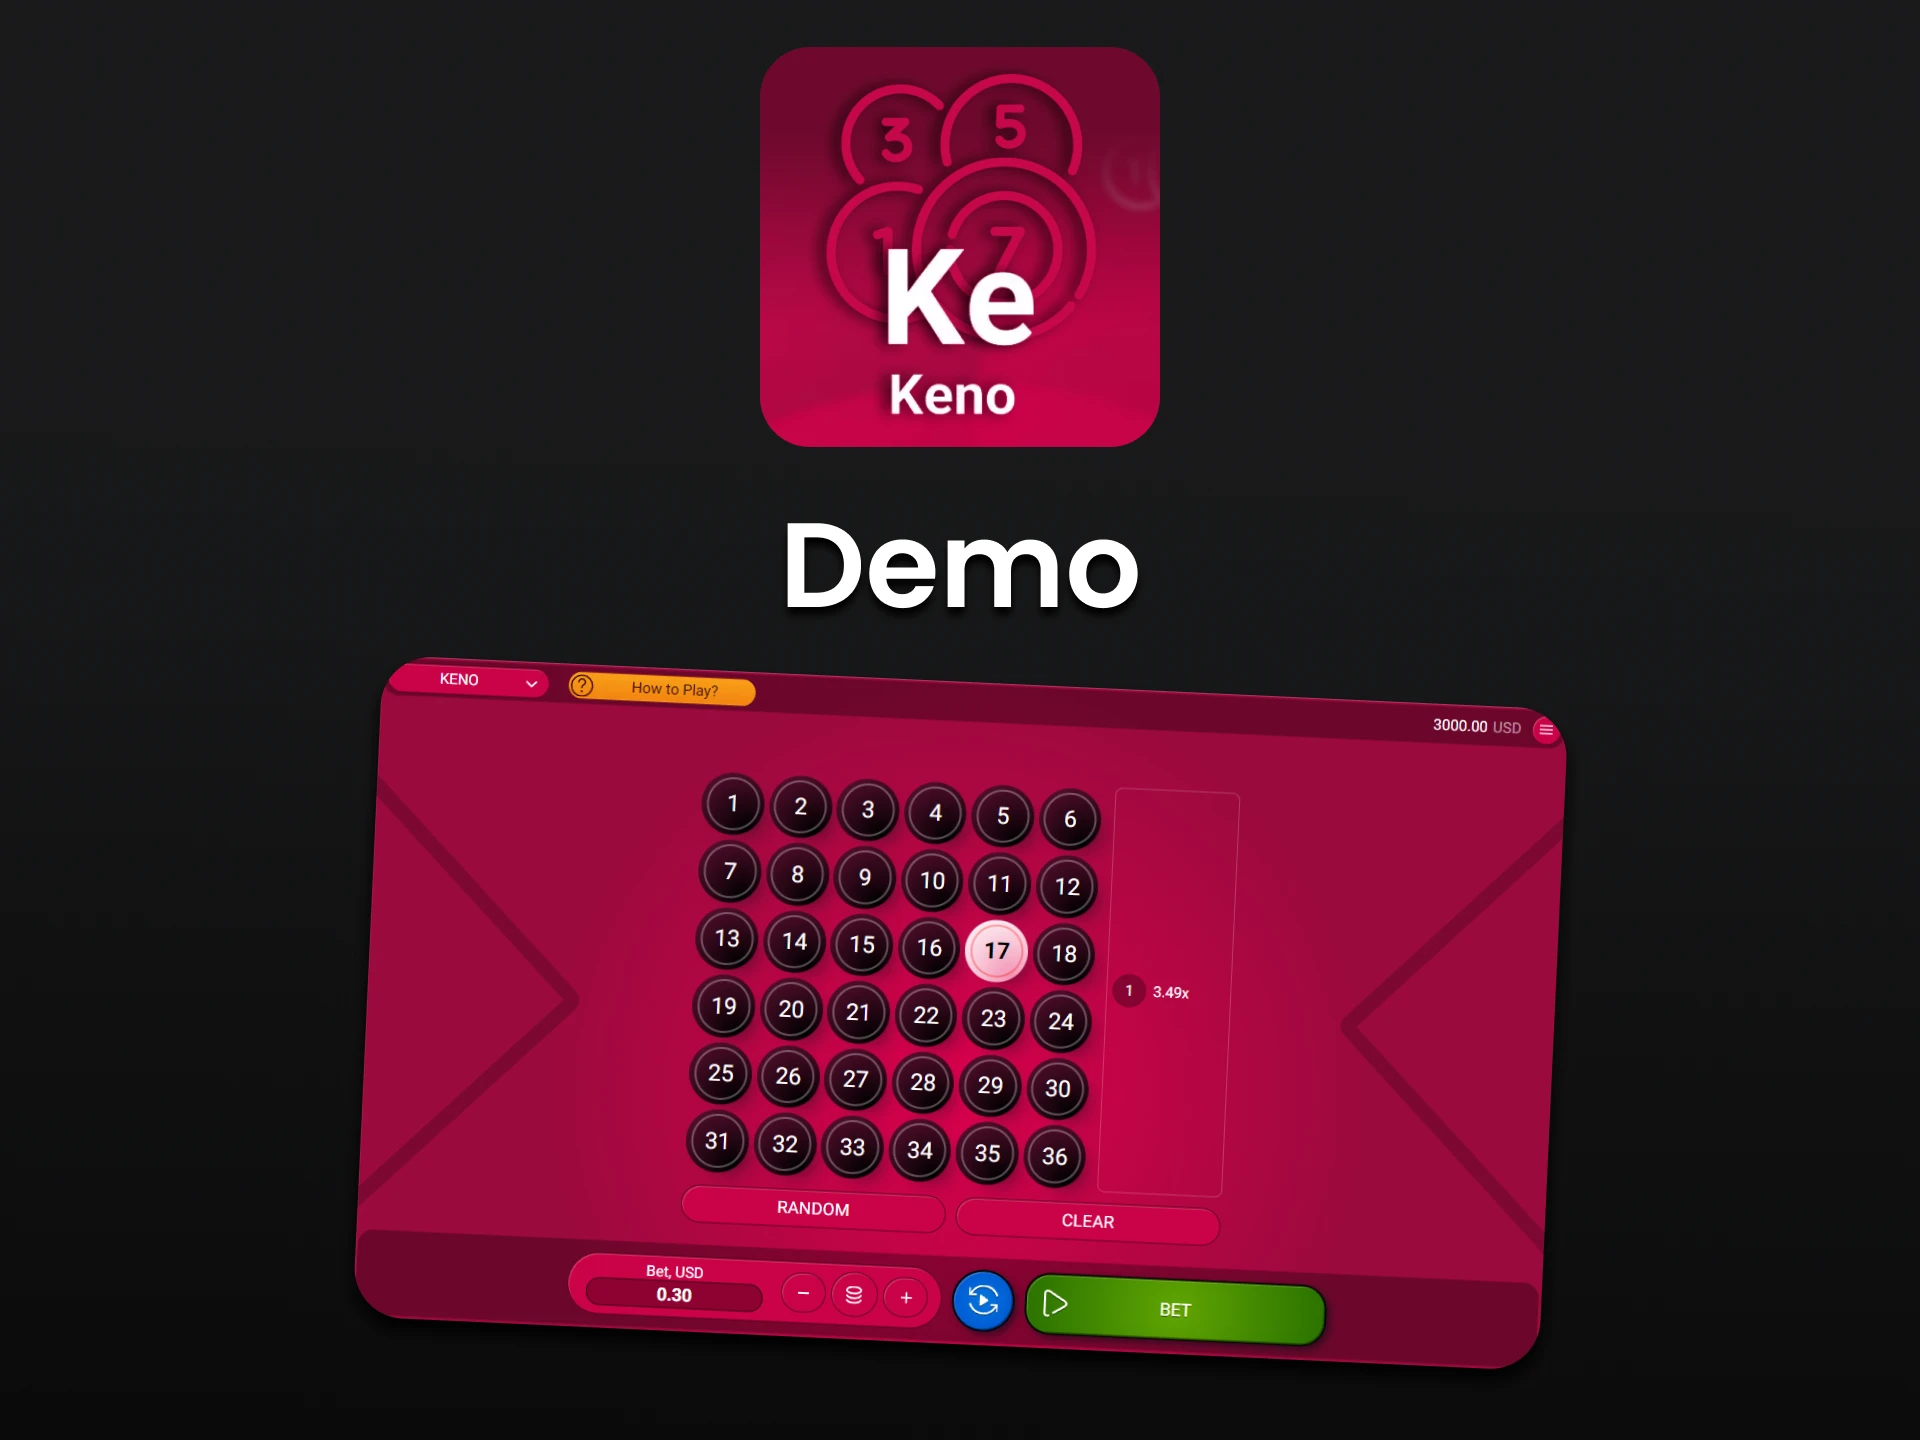 Gain experience in the demo version of the Keno game.